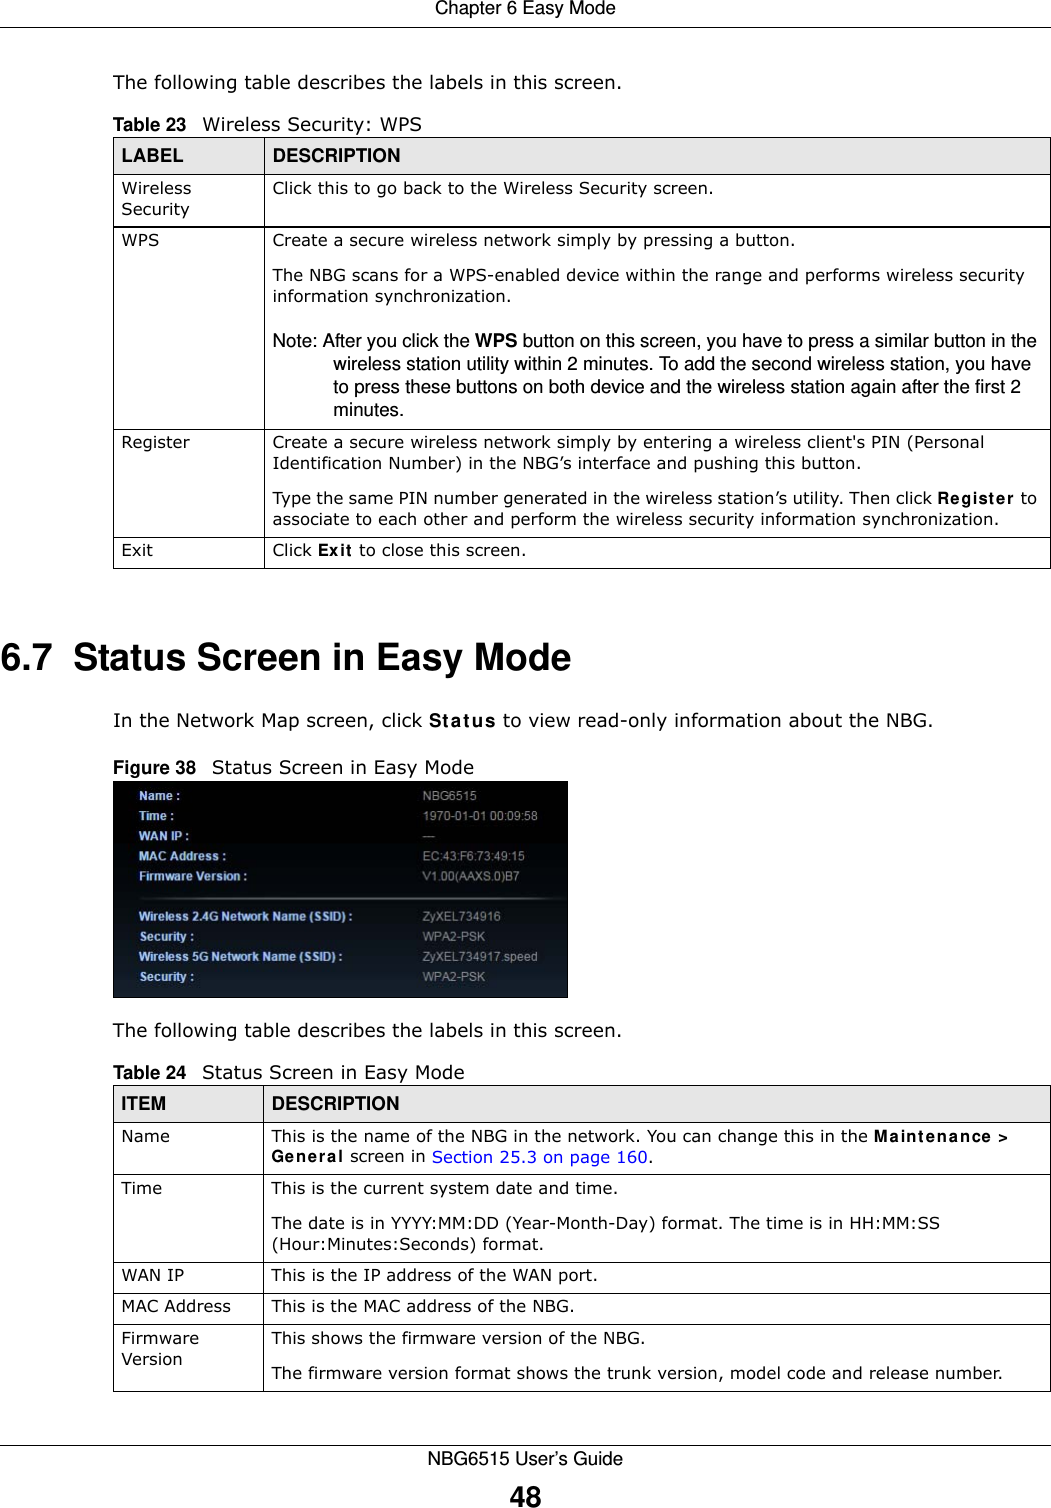 Chapter 6 Easy ModeNBG6515 User’s Guide48The following table describes the labels in this screen.6.7  Status Screen in Easy ModeIn the Network Map screen, click Status to view read-only information about the NBG.Figure 38   Status Screen in Easy Mode The following table describes the labels in this screen. Table 23   Wireless Security: WPSLABEL DESCRIPTIONWireless SecurityClick this to go back to the Wireless Security screen.WPS Create a secure wireless network simply by pressing a button. The NBG scans for a WPS-enabled device within the range and performs wireless security information synchronization. Note: After you click the WPS button on this screen, you have to press a similar button in the wireless station utility within 2 minutes. To add the second wireless station, you have to press these buttons on both device and the wireless station again after the first 2 minutes.Register Create a secure wireless network simply by entering a wireless client&apos;s PIN (Personal Identification Number) in the NBG’s interface and pushing this button.Type the same PIN number generated in the wireless station’s utility. Then click Register to associate to each other and perform the wireless security information synchronization.Exit Click Exit to close this screen.Table 24   Status Screen in Easy ModeITEM DESCRIPTIONName This is the name of the NBG in the network. You can change this in the Maintenance &gt; General screen in Section 25.3 on page 160.Time This is the current system date and time.The date is in YYYY:MM:DD (Year-Month-Day) format. The time is in HH:MM:SS (Hour:Minutes:Seconds) format.WAN IP This is the IP address of the WAN port.MAC Address This is the MAC address of the NBG.Firmware VersionThis shows the firmware version of the NBG. The firmware version format shows the trunk version, model code and release number.